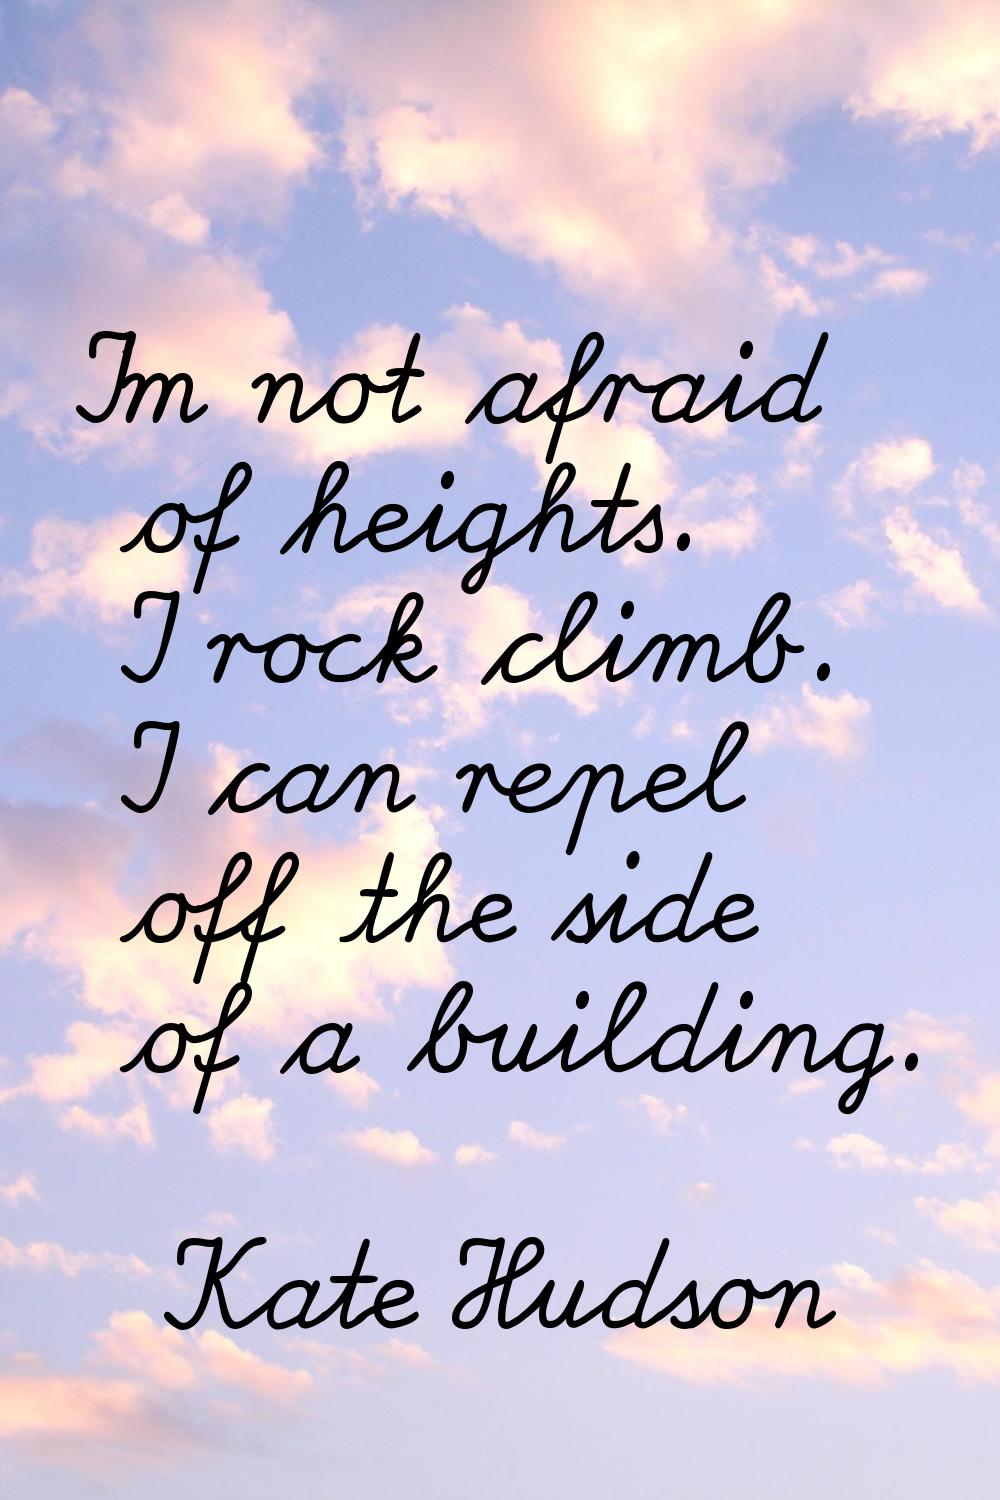 I'm not afraid of heights. I rock climb. I can repel off the side of a building.